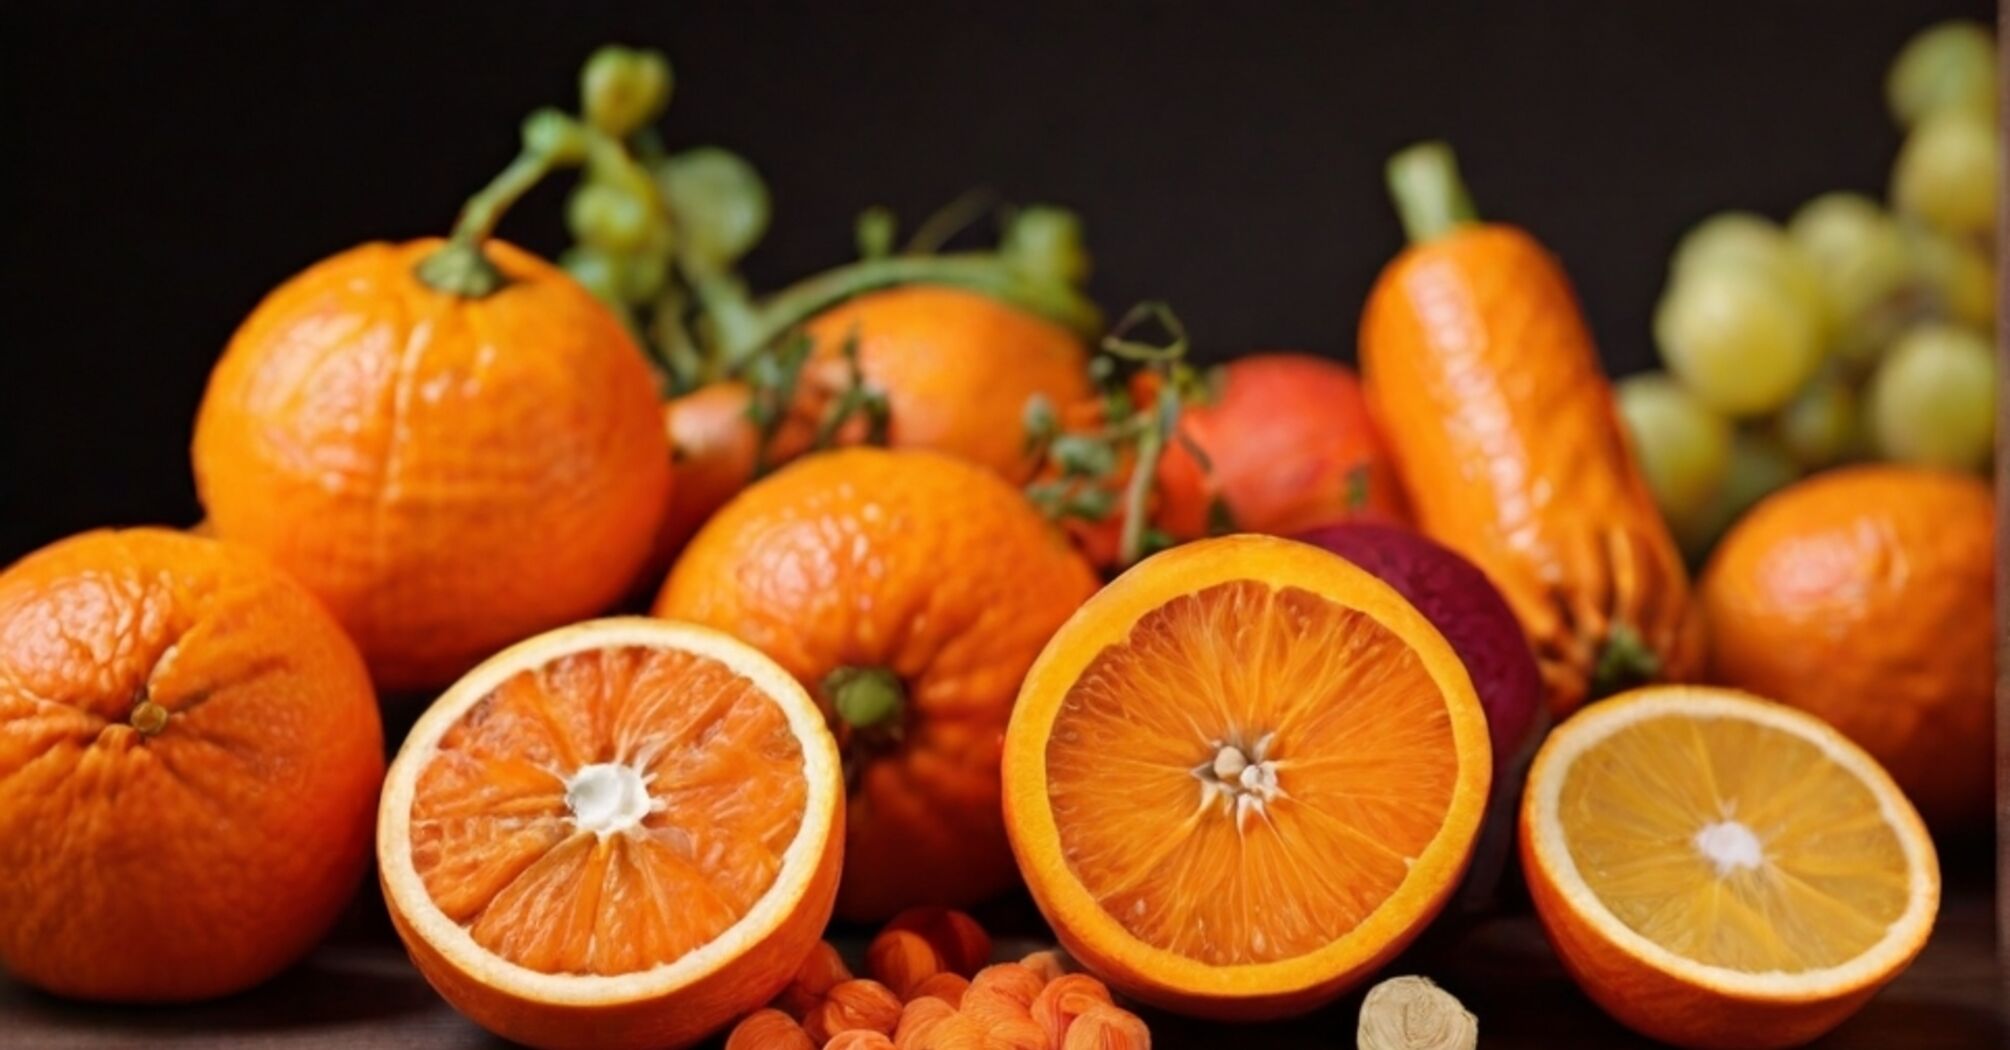 What are the benefits of orange fruits and vegetables